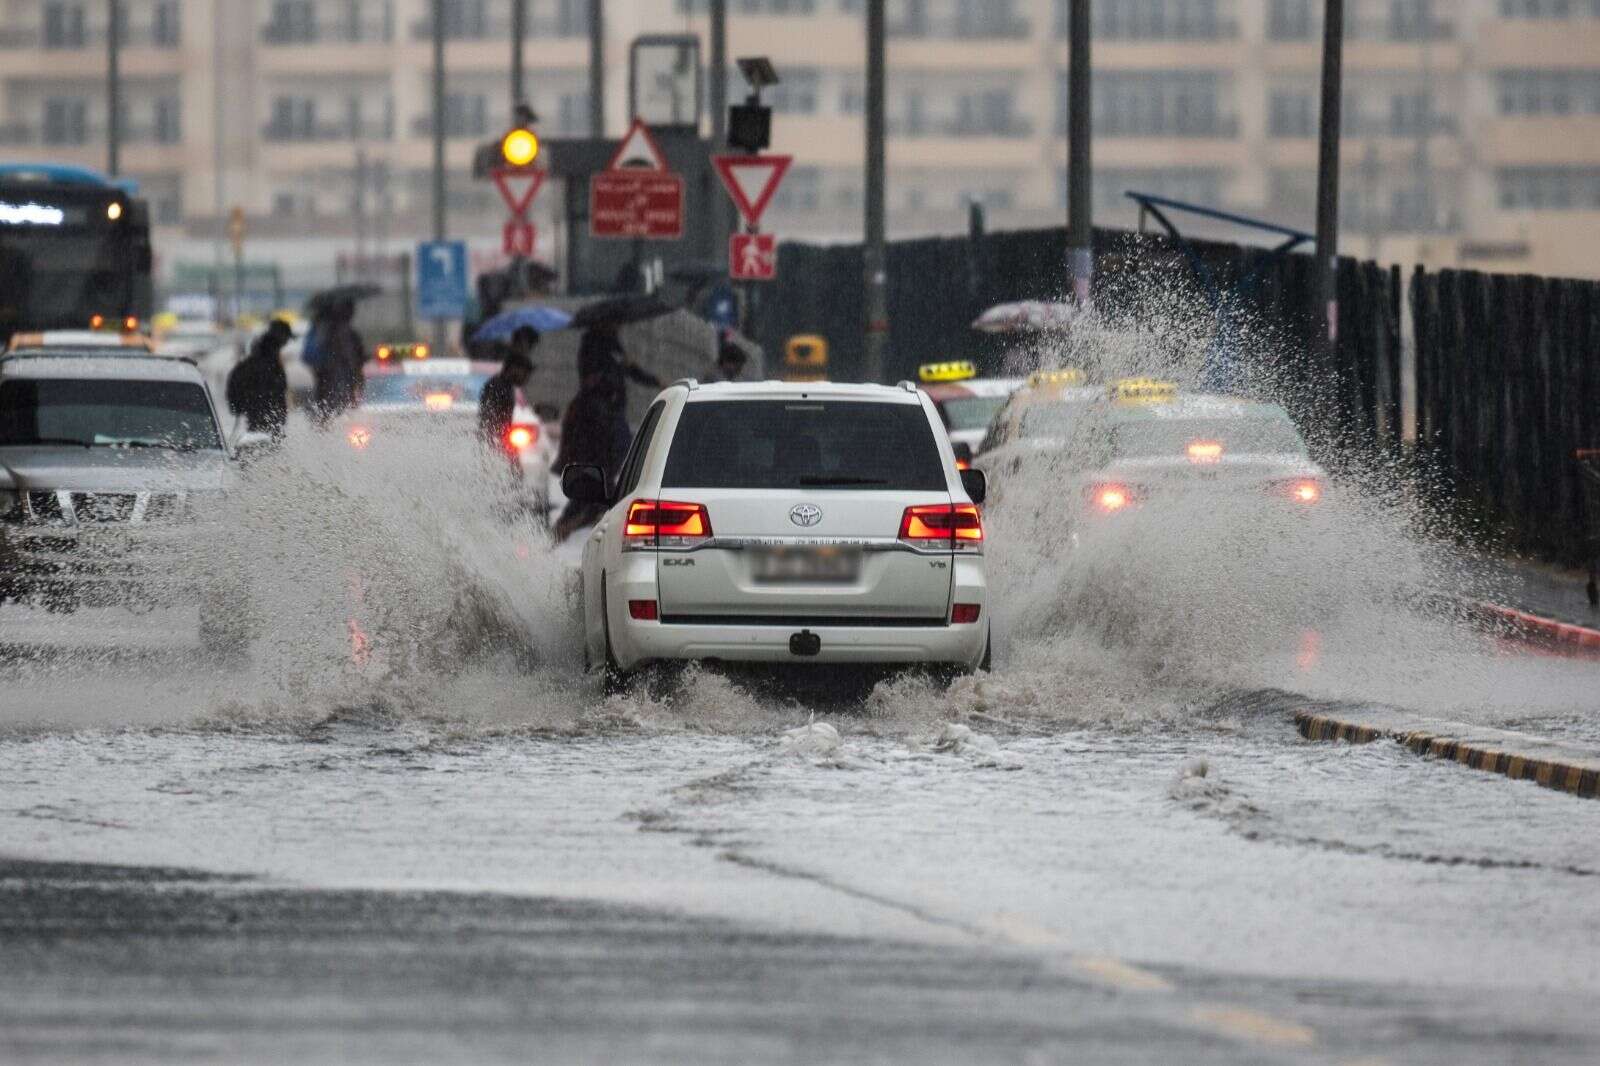 uae weather: residents alerted of heavy rain, dust storm in some areas